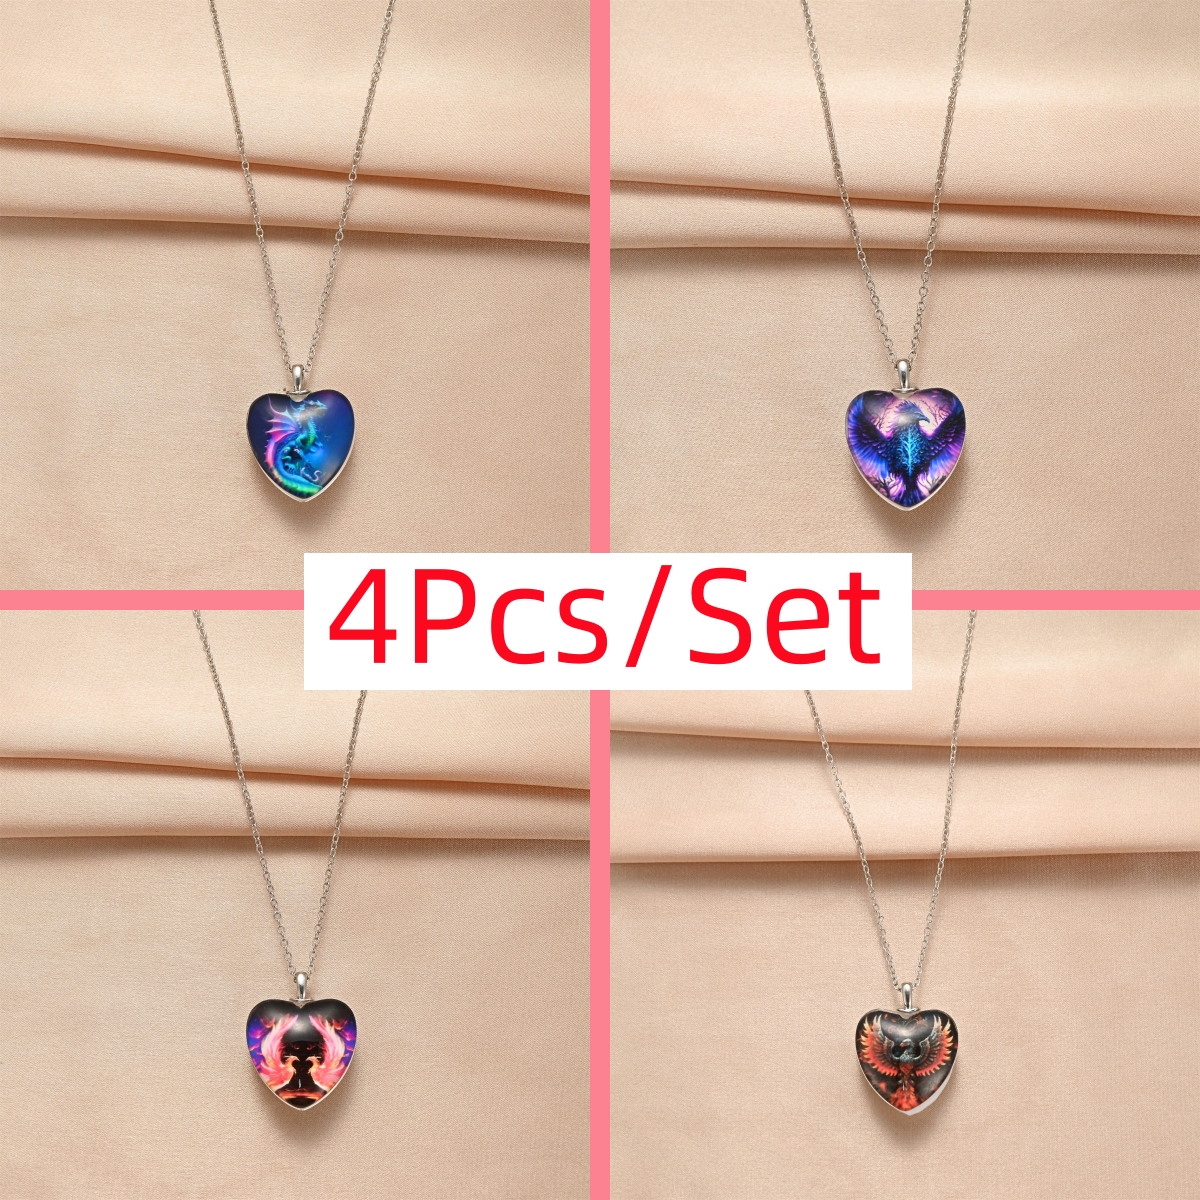 4pcs/set Trendy Cute Exquisite Pendant Necklaces, Creative Heart-shaped  Animal Dragon Eagle Necklace, Anniversary Birthday Holiday Party Gift For